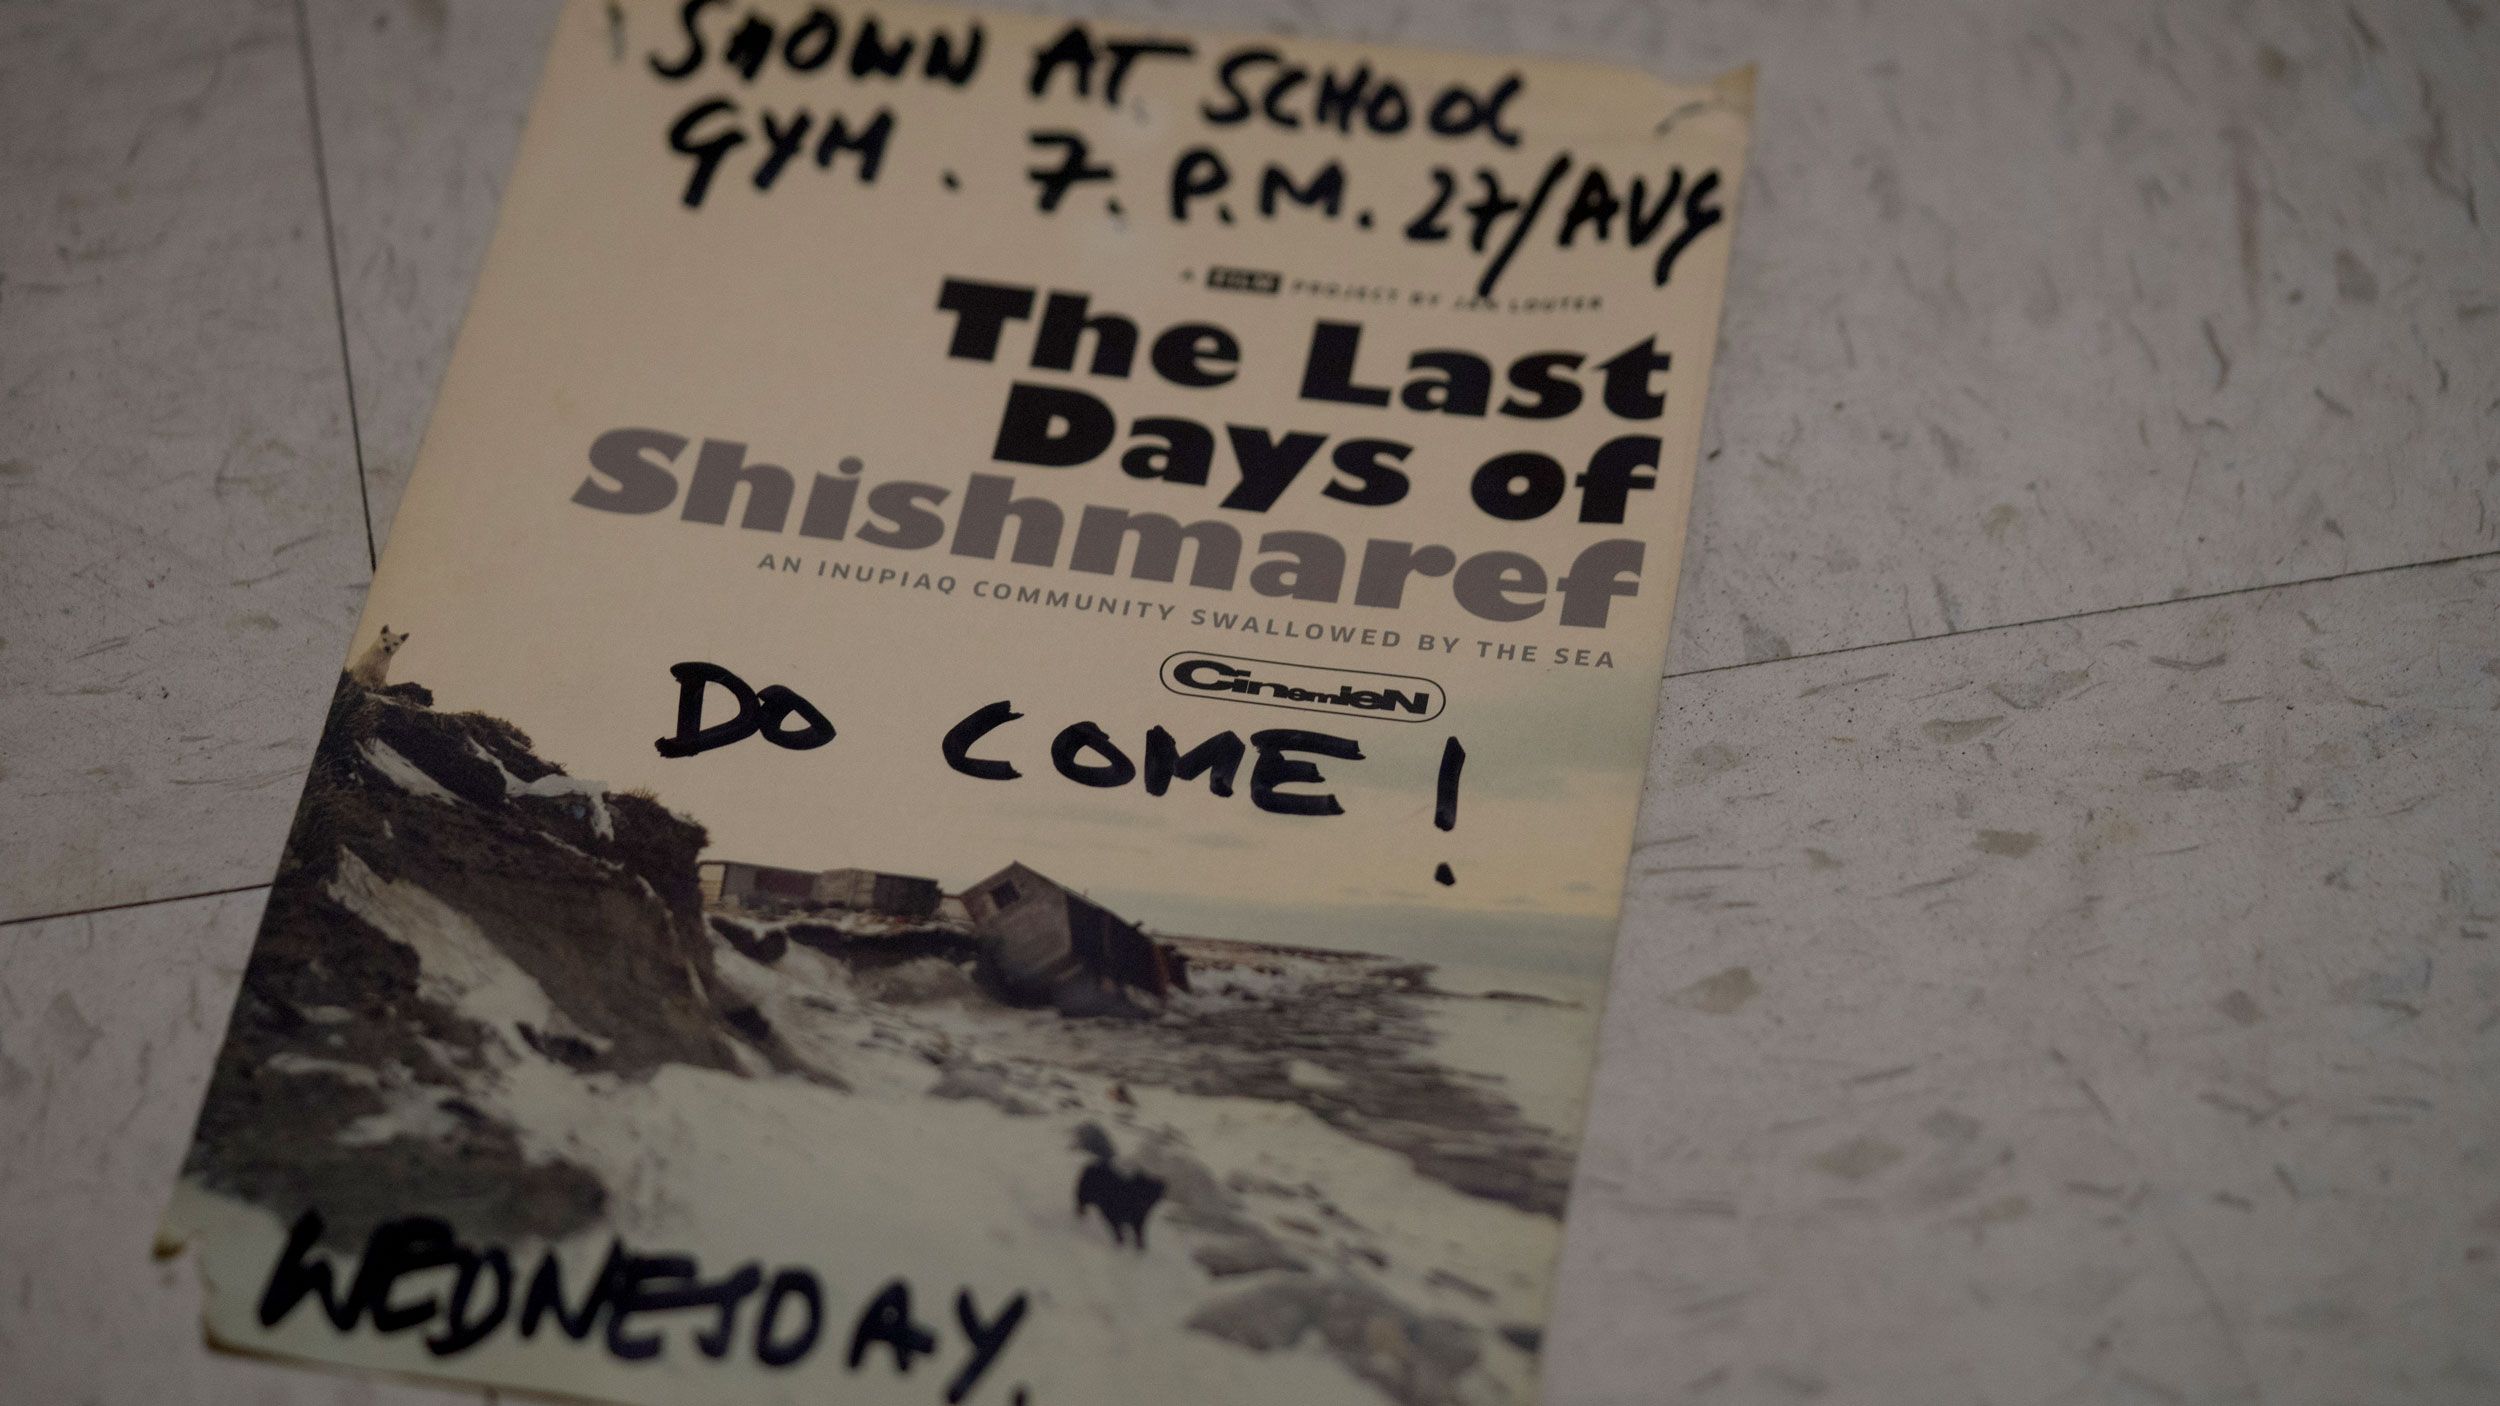 A flyer invites residents to a screening of "The Last Days of Shishmaref." Someone has added a handwritten "Do Come!" to the flyer. Image courtesy of Nick Mott. United States, 2018.